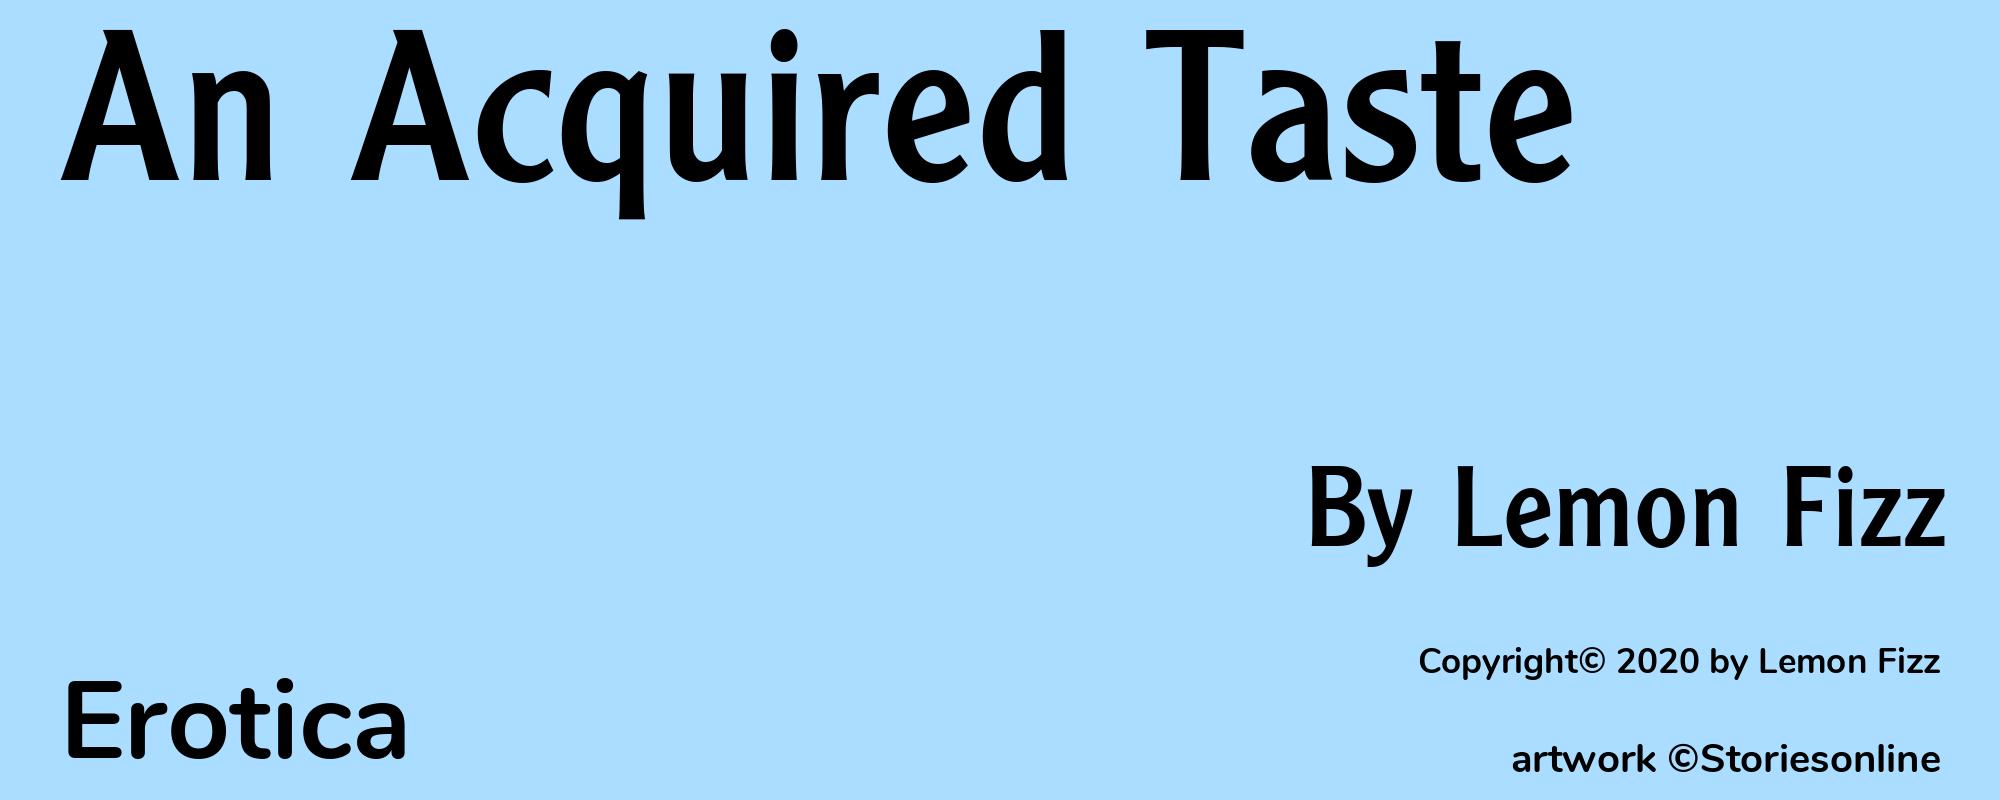 An Acquired Taste - Cover